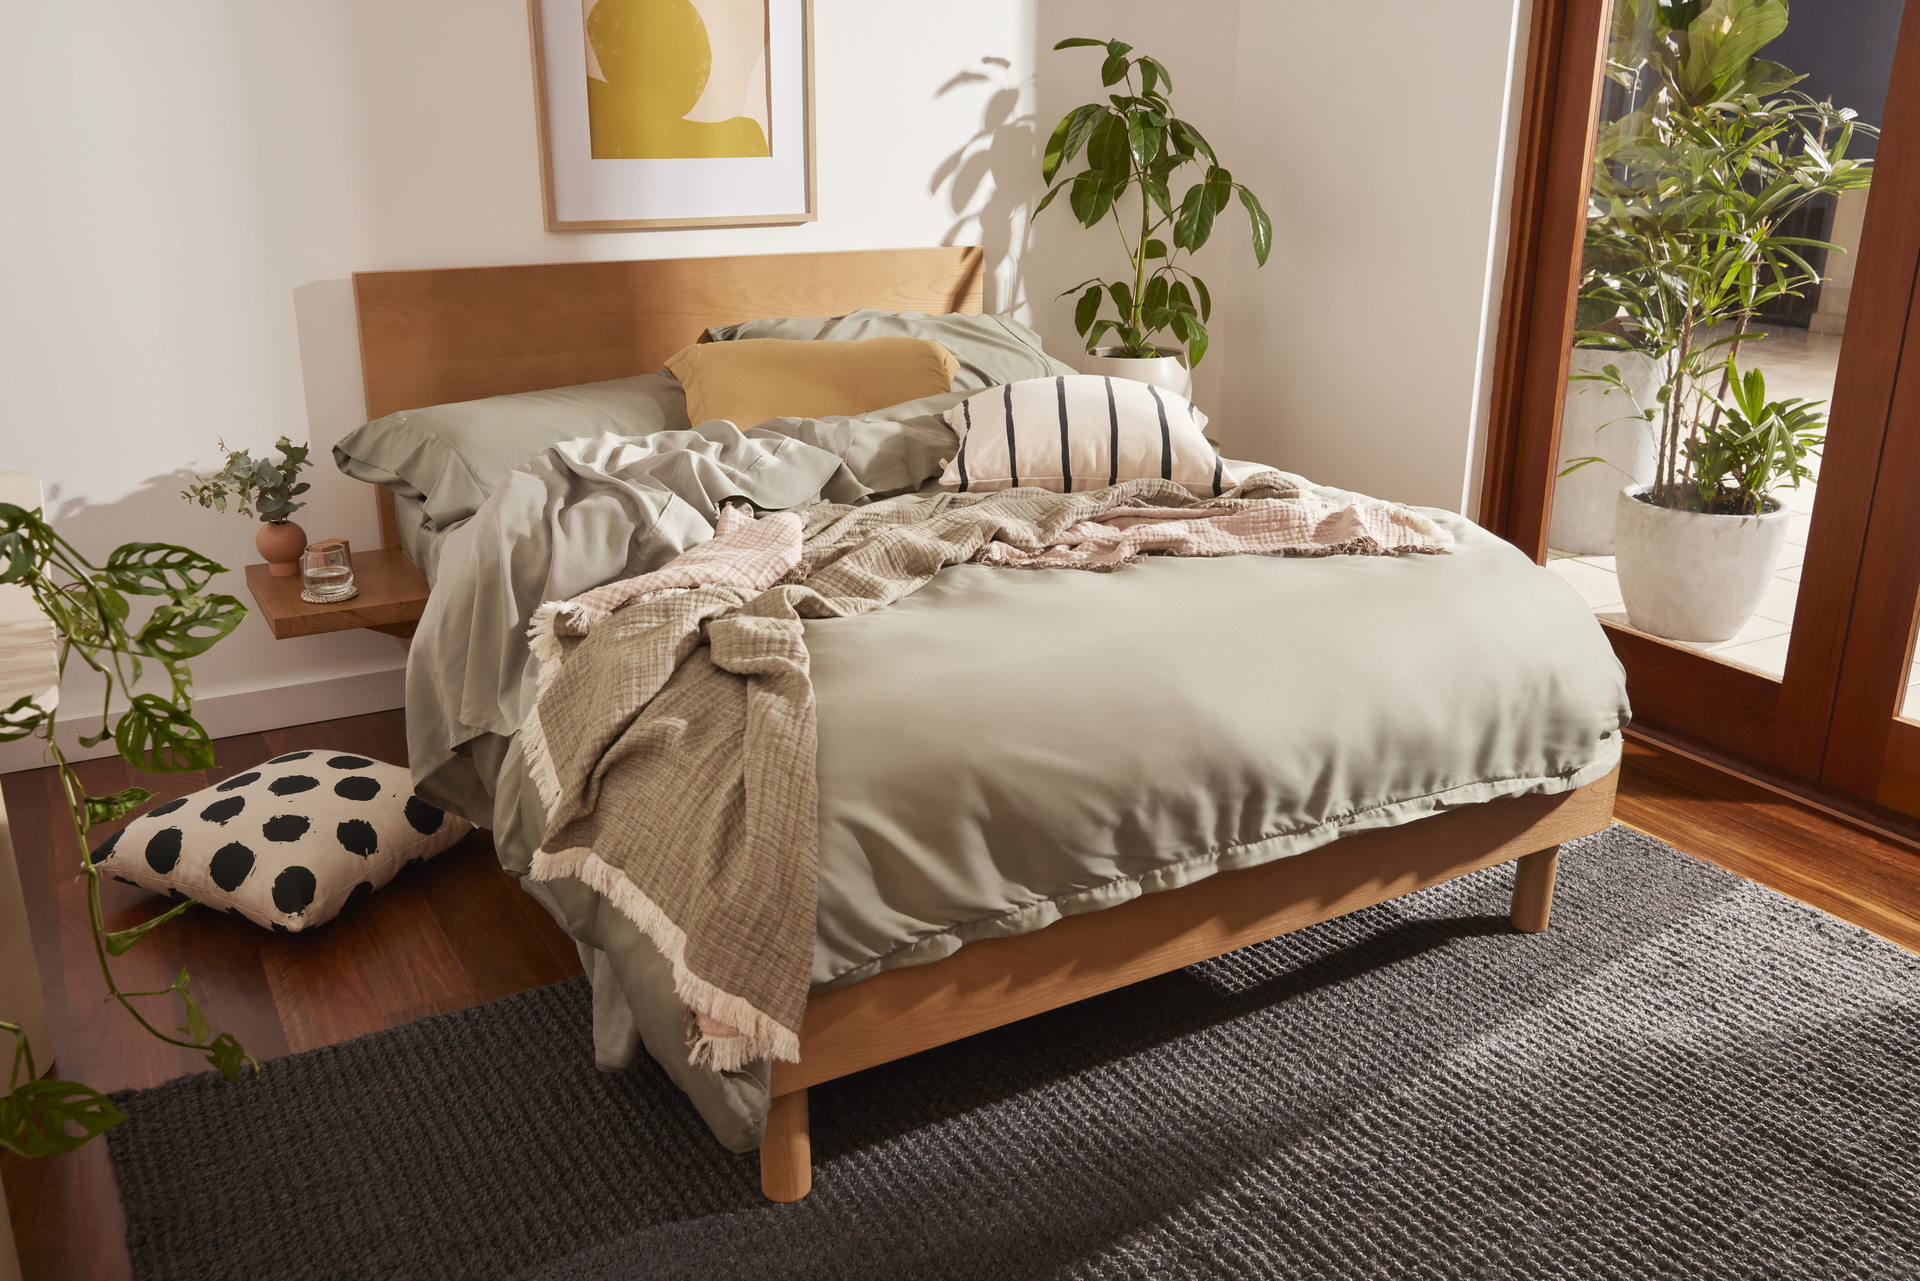 A double Koala bed and mattress in a teenage bedroom with bedding, throw and cushions